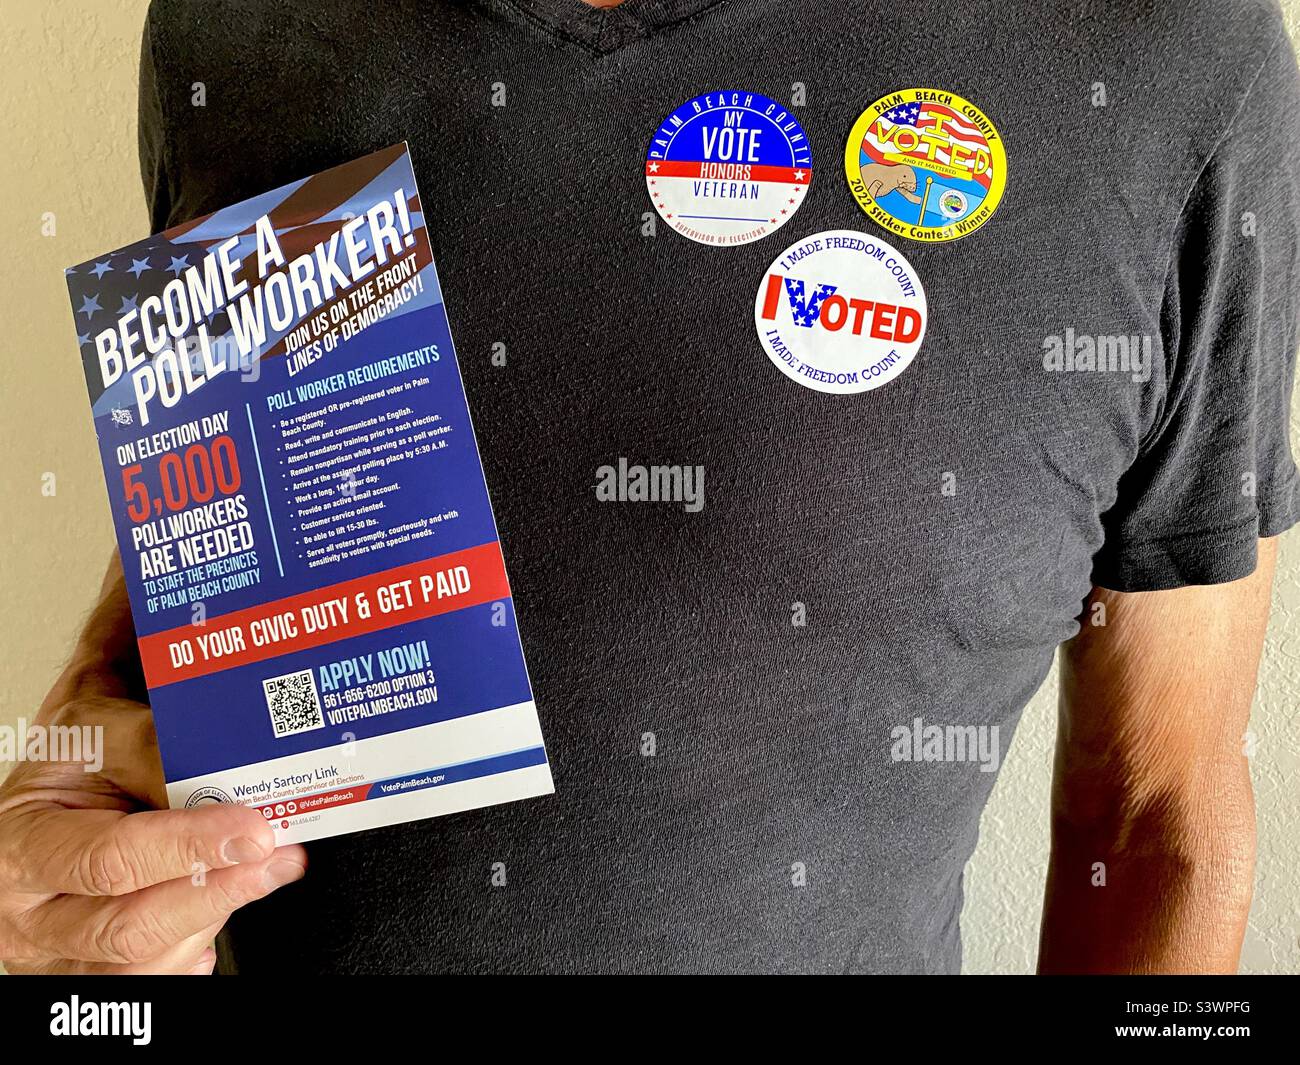 “I VOTED” and poll worker volunteer pamphlets. Stock Photo